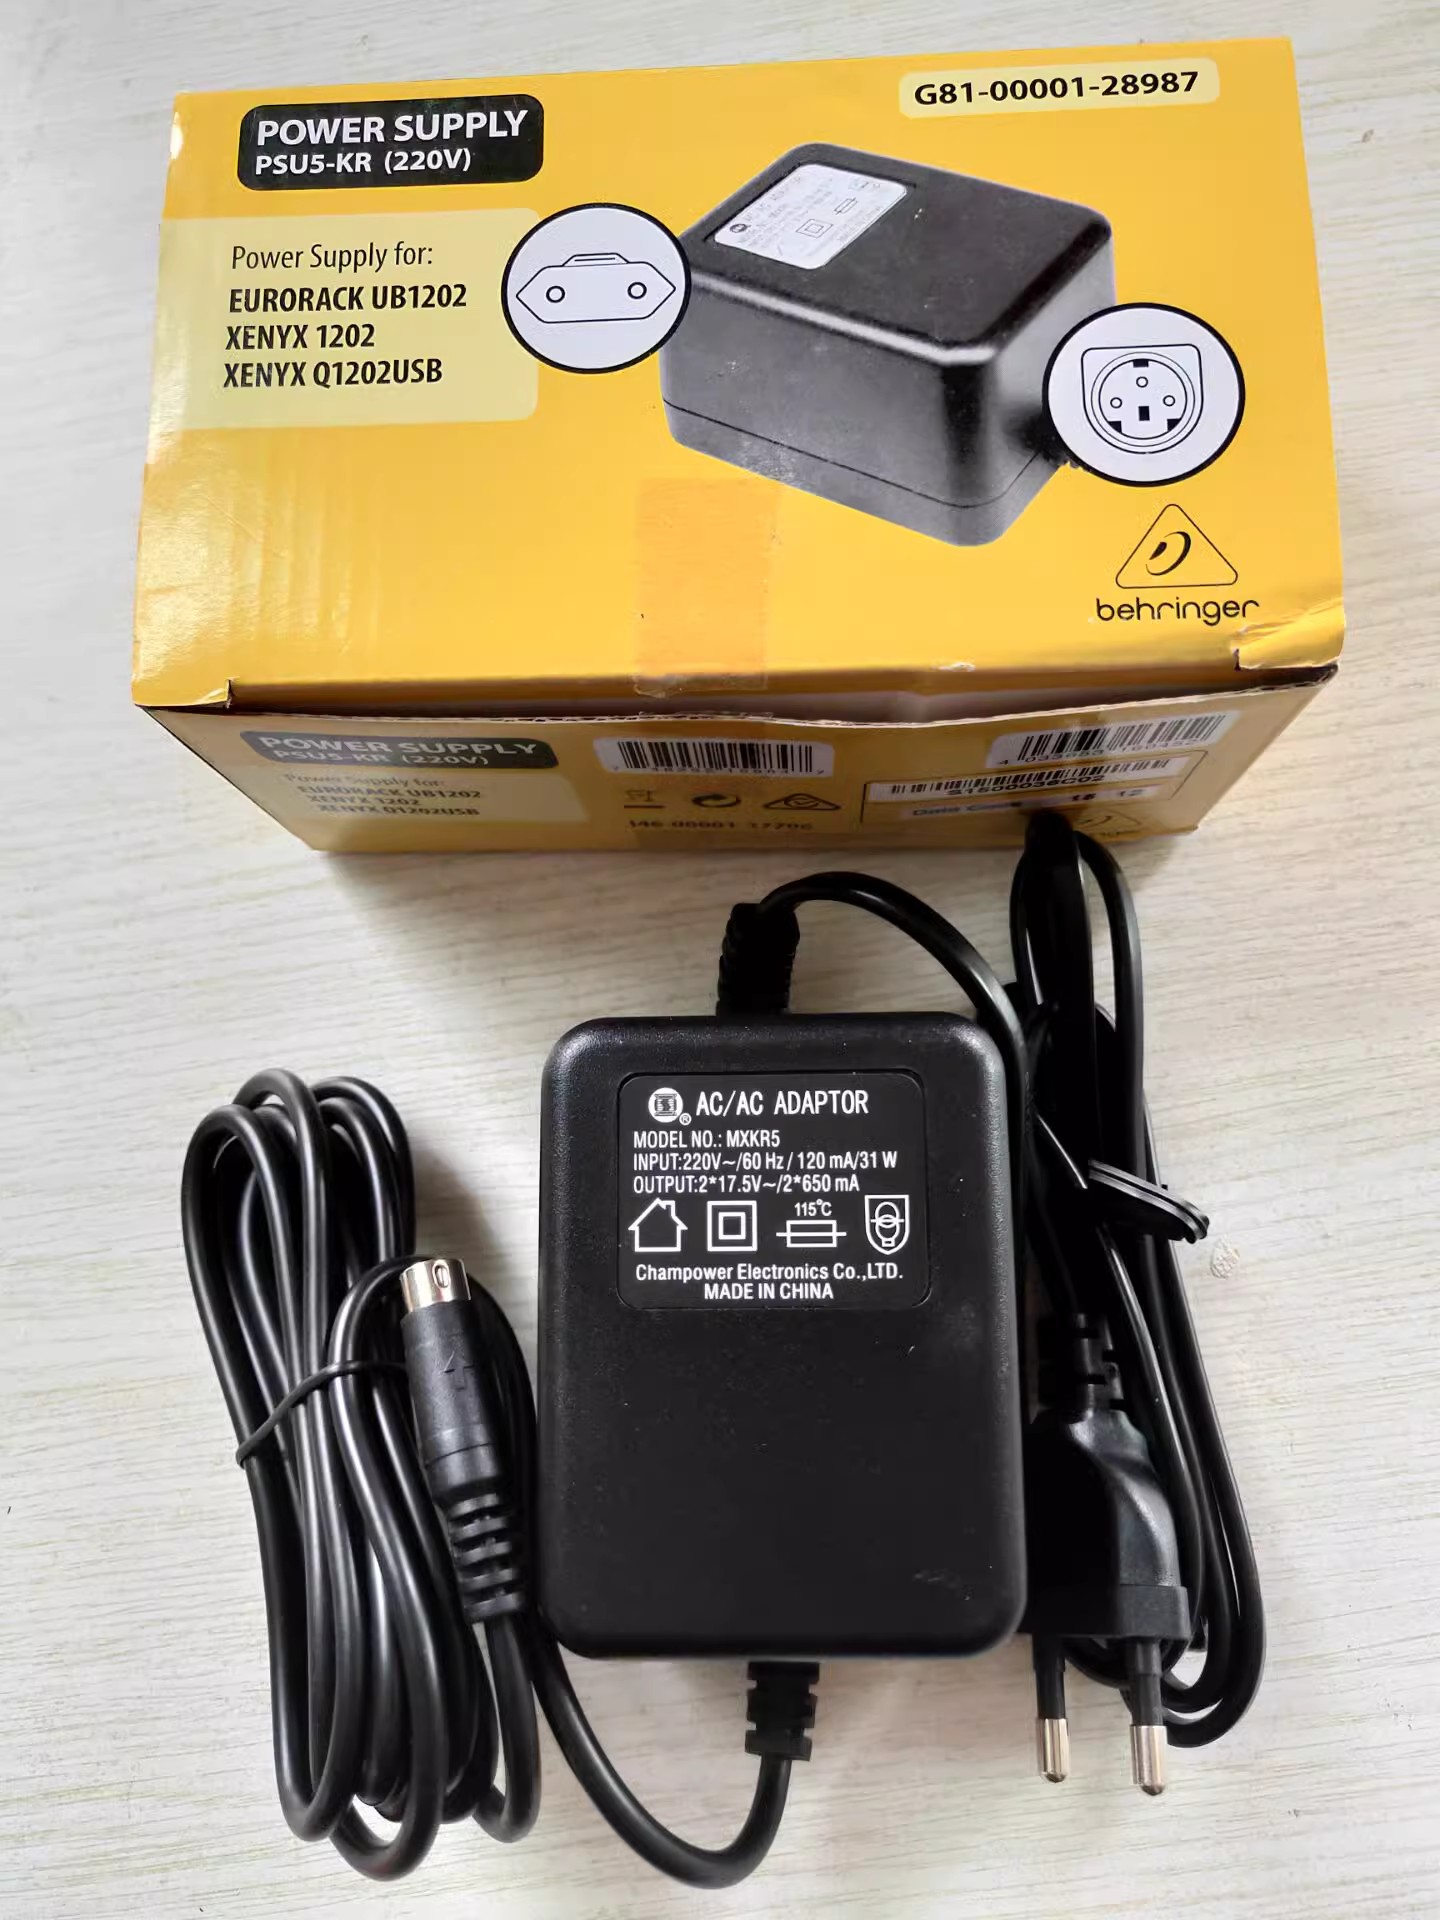 *Brand NEW* 3pin 2*17.5V 2*650MA AC DC ADAPTHE XENYX1202 MKR5 BEHRINGER POWER Supply